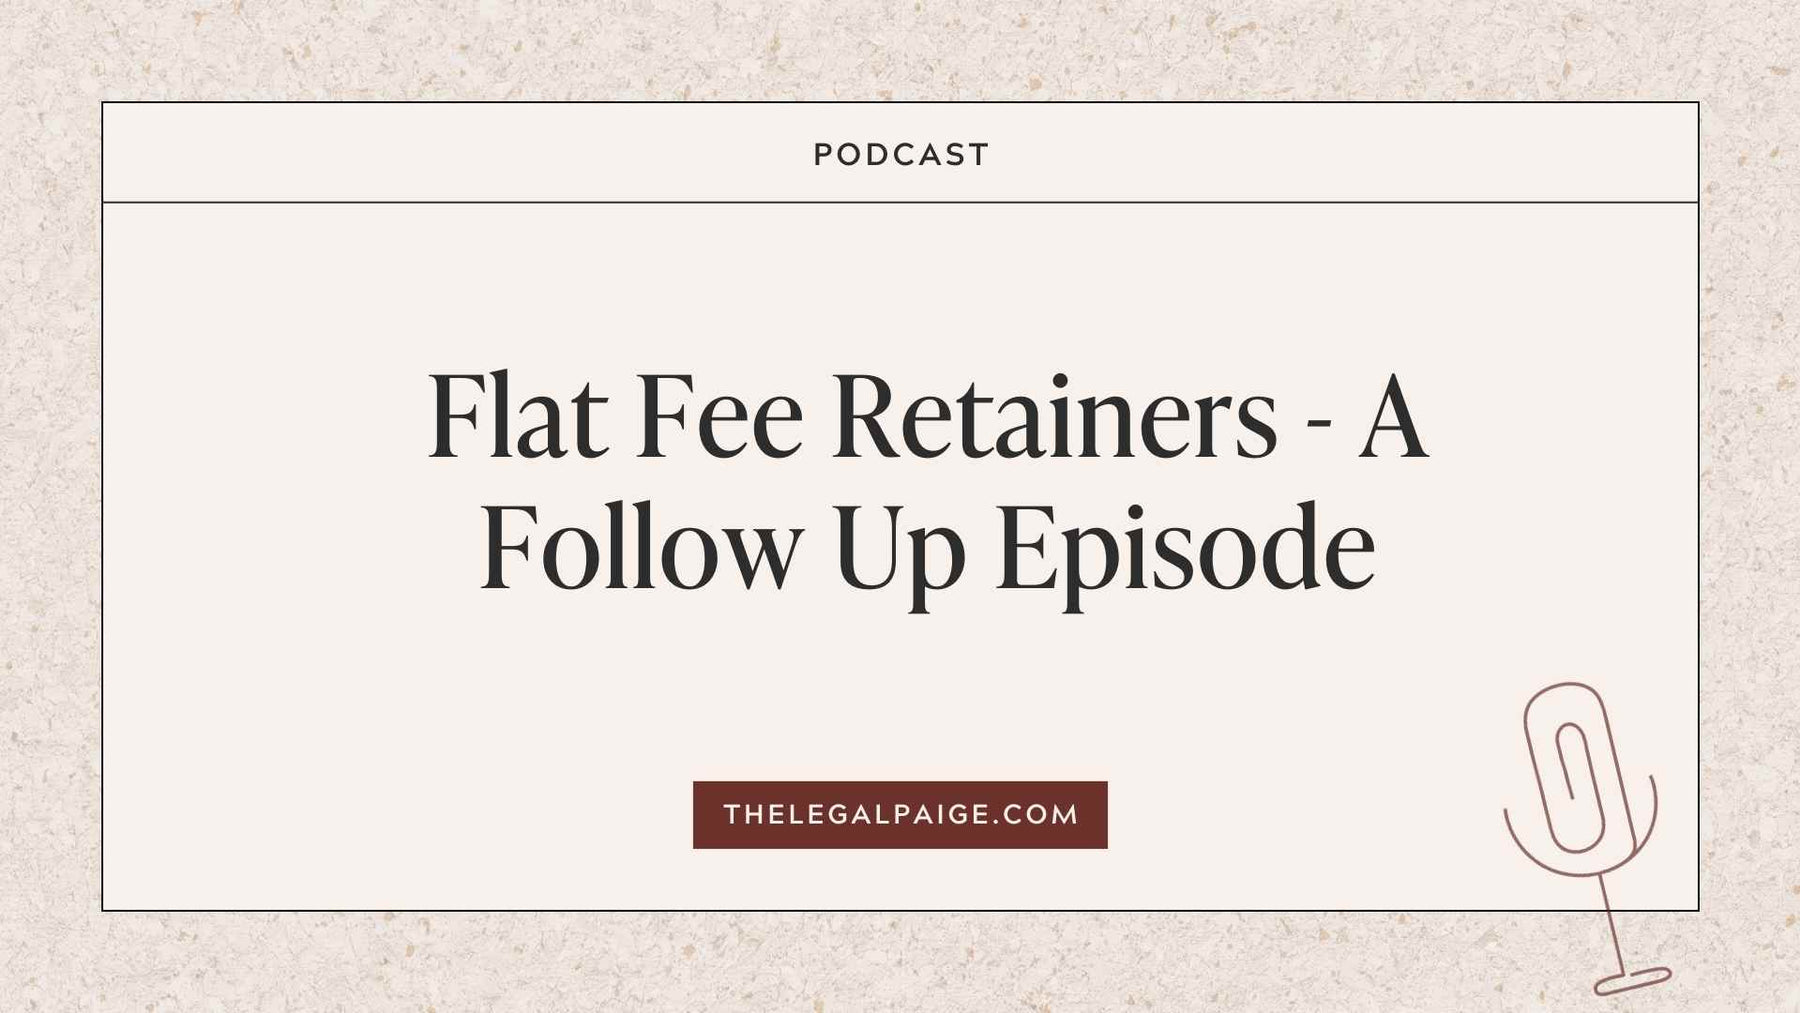 Episode 67: Flat Fee Retainers - A Follow Up Episode